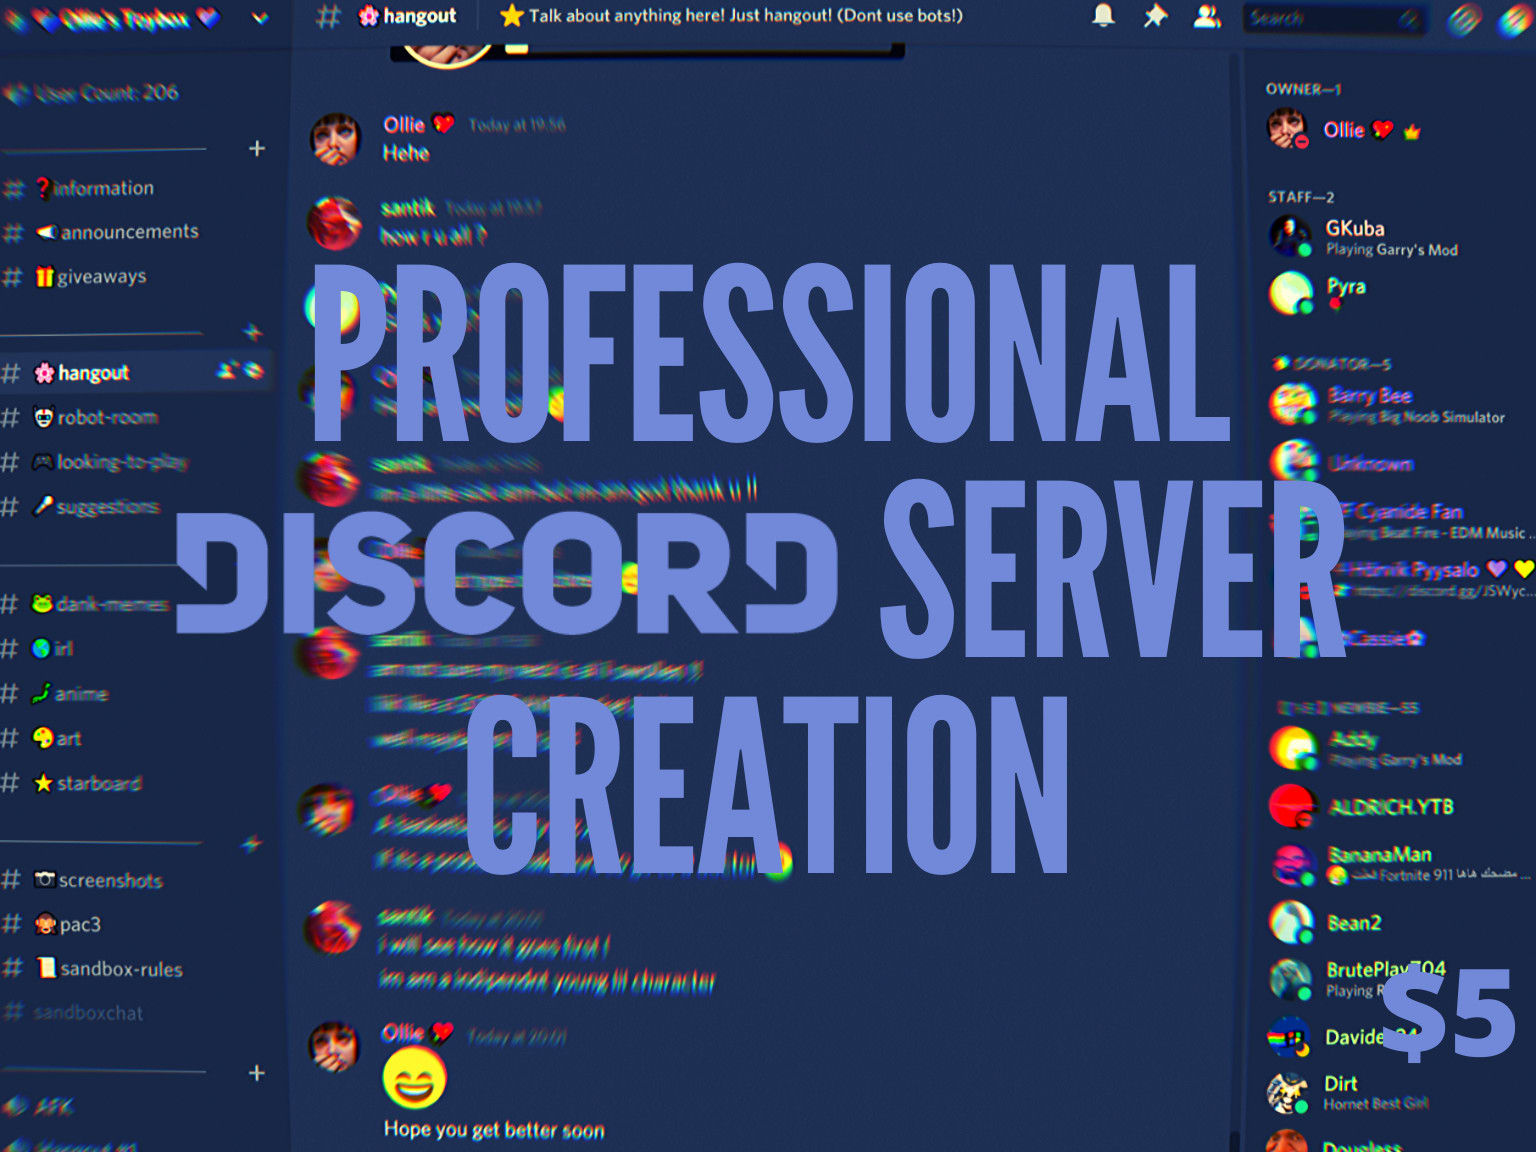 Create a discord server within hours by Fiverr